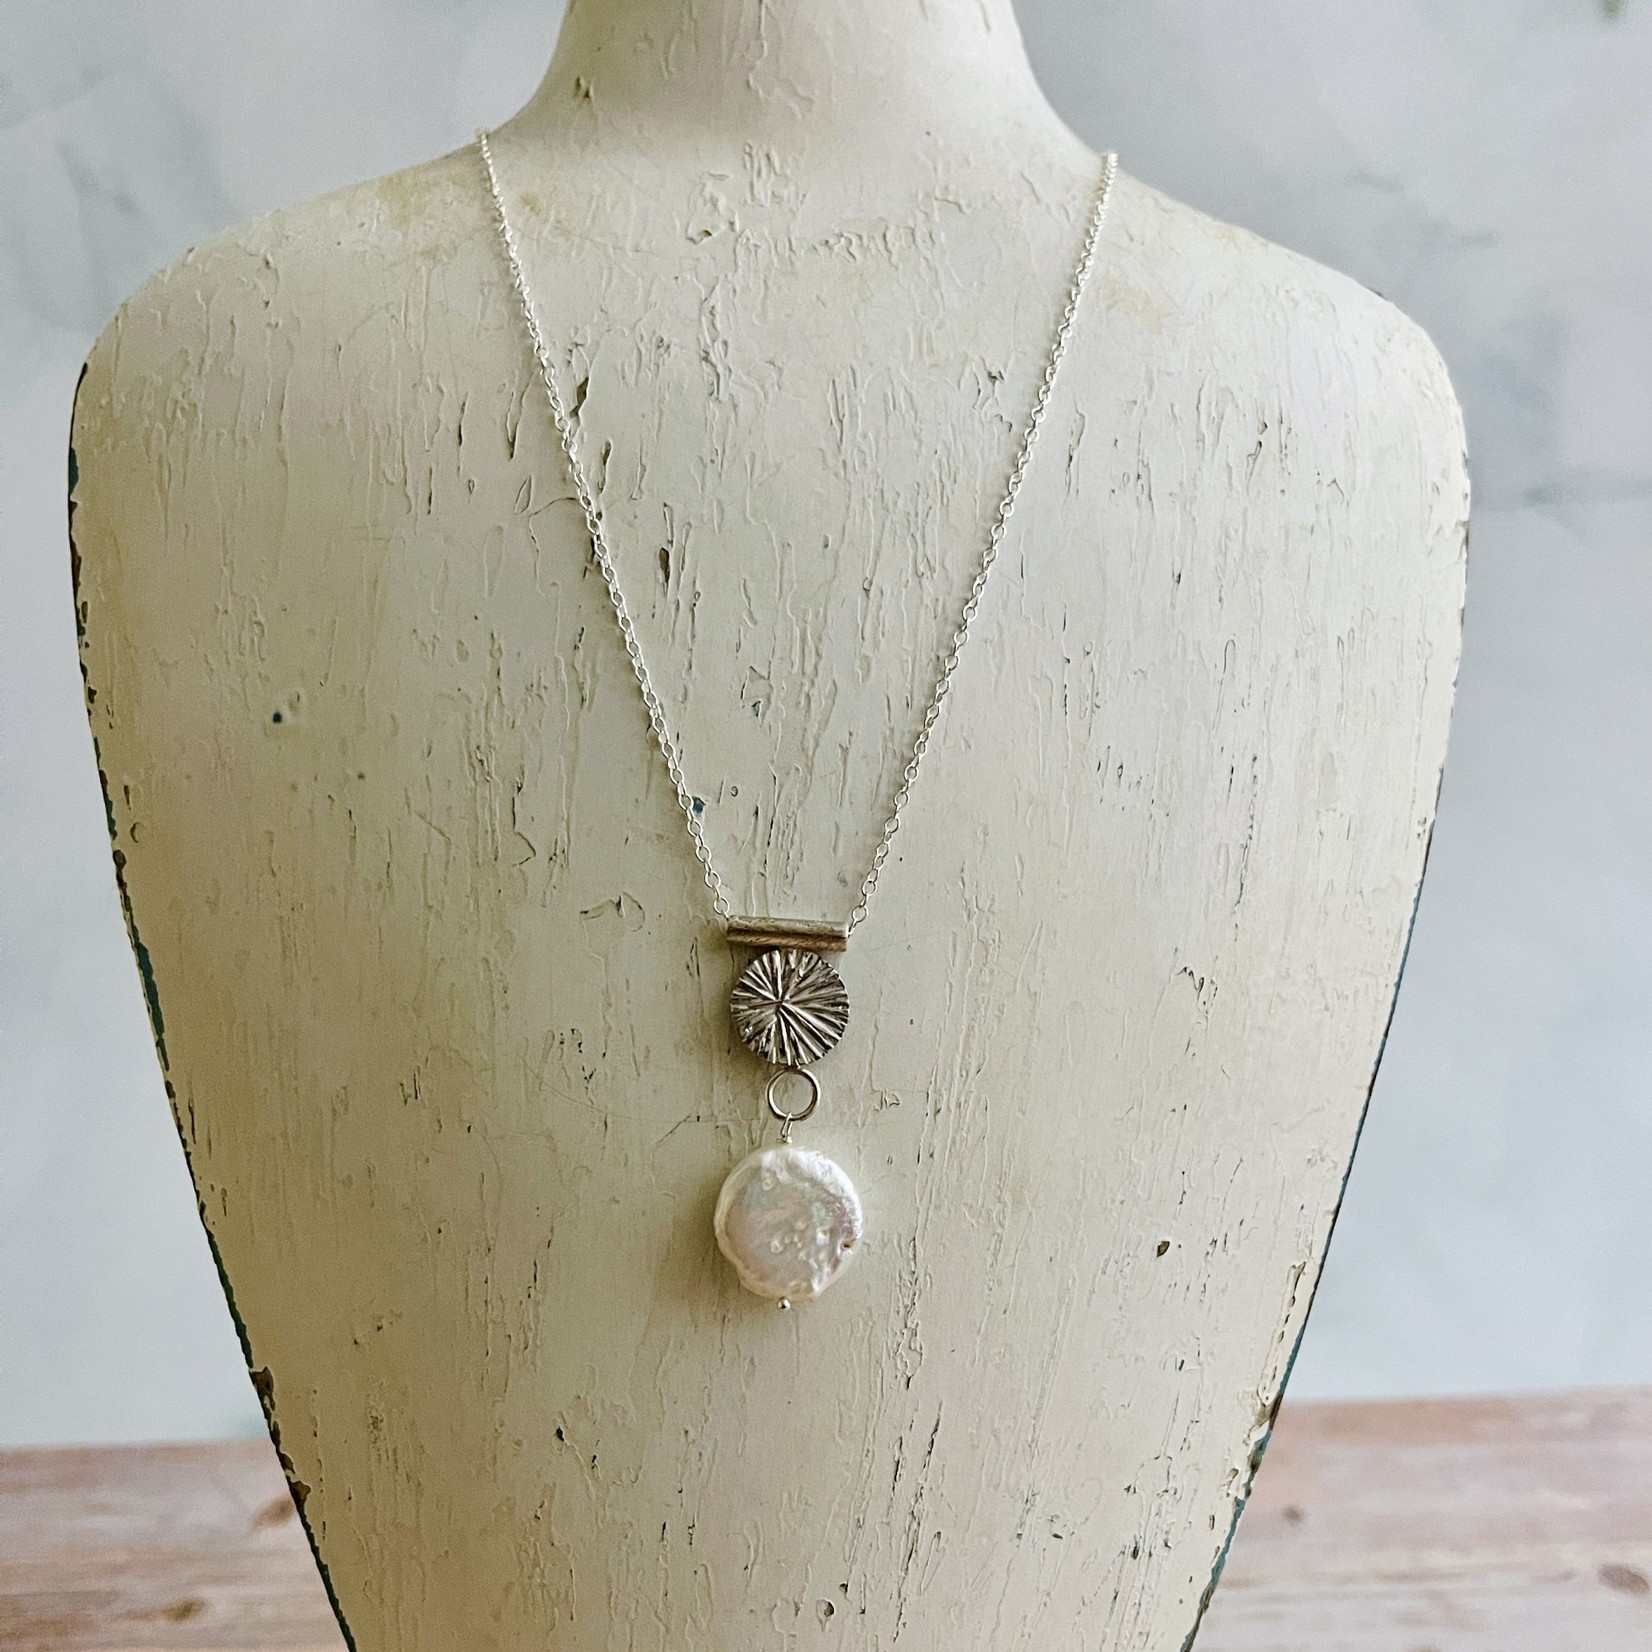 Handmade Necklace with brushed tube-starburst disk bail, white coin pearl 16", 1.75"